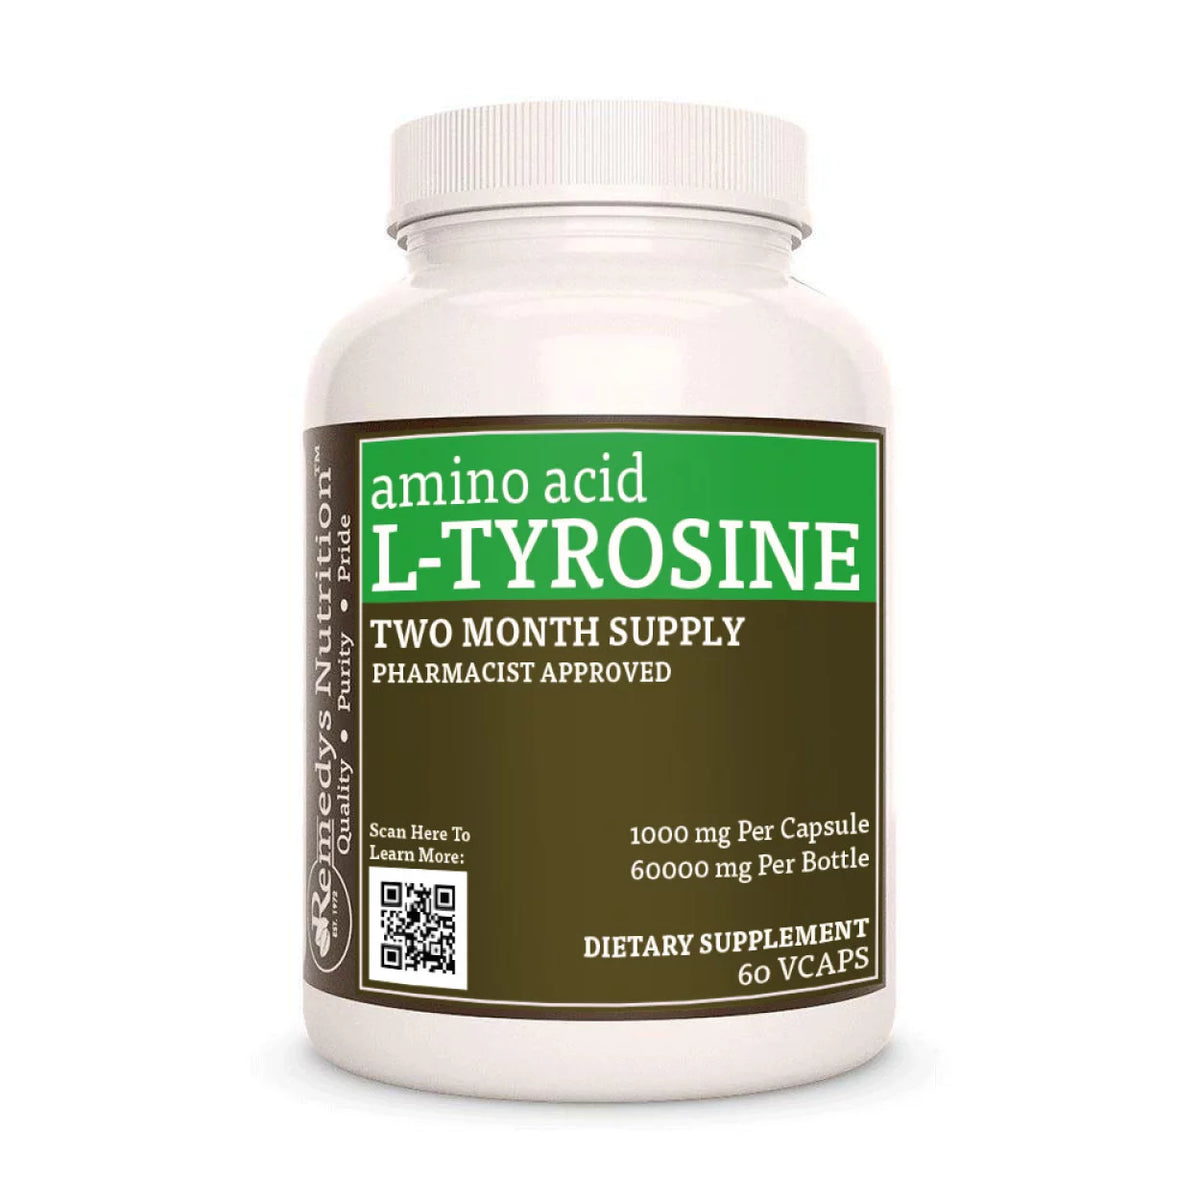 Image of Remedy's Nutrition® L-Tyrosine Capsules Dietary Supplement front bottle. Made in the USA.